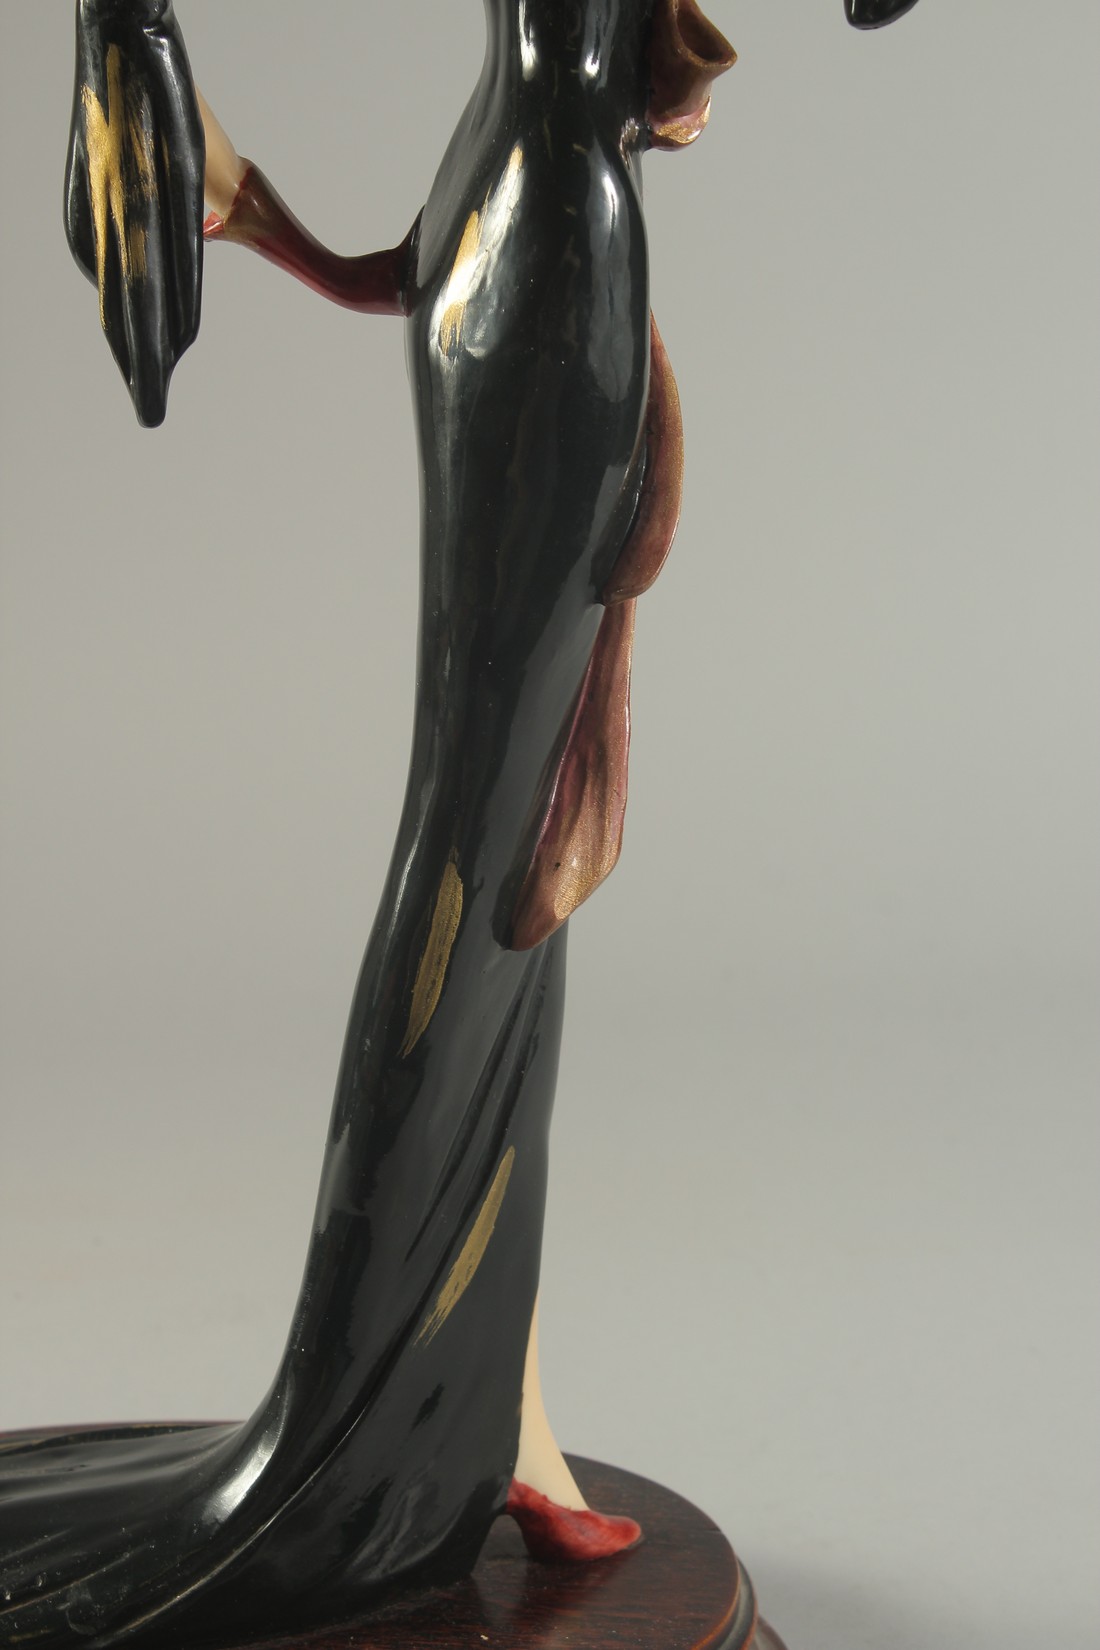 AMILCARE SANTINI (1910 - 1973) ITALIAN. AN ART DECO PORCELAIN LADY in a black dress. 17ins high. - Image 7 of 9